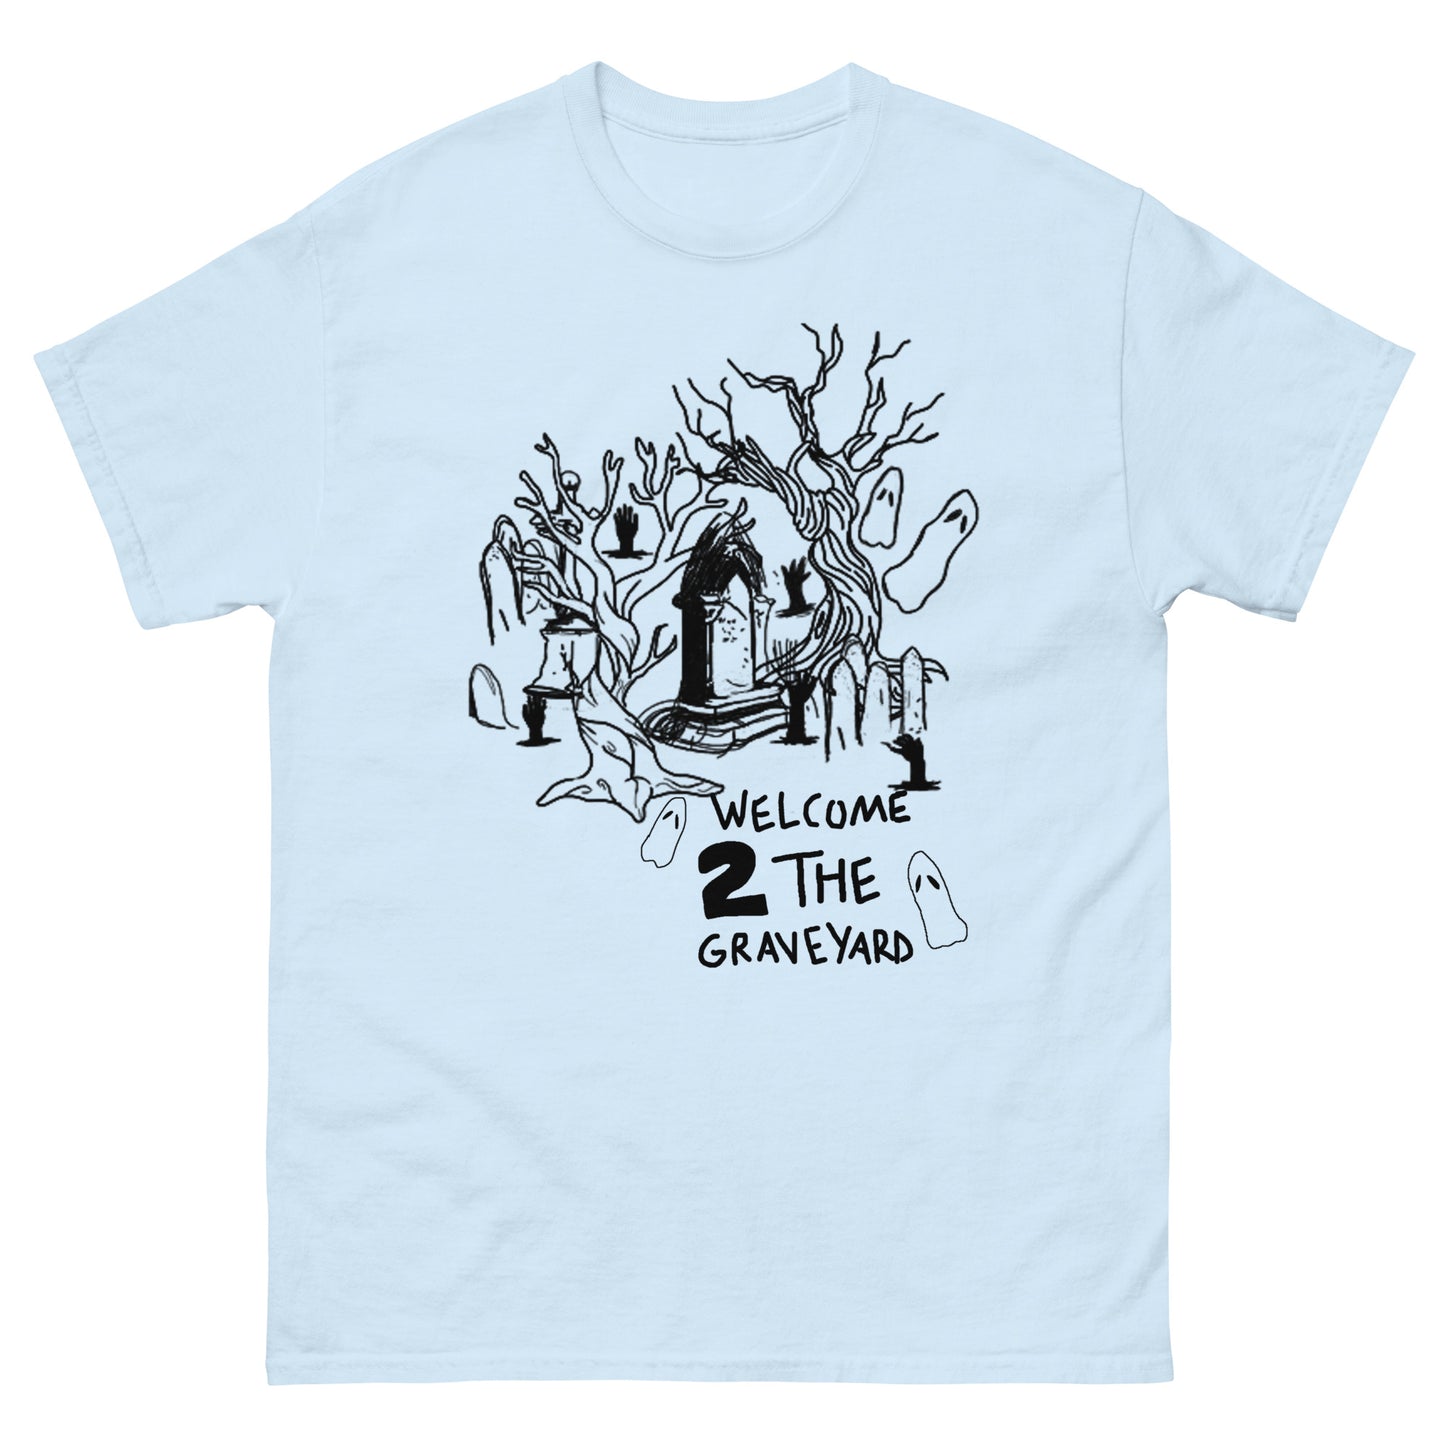 "WELCOME TO THE GRAVEYARD" TEE